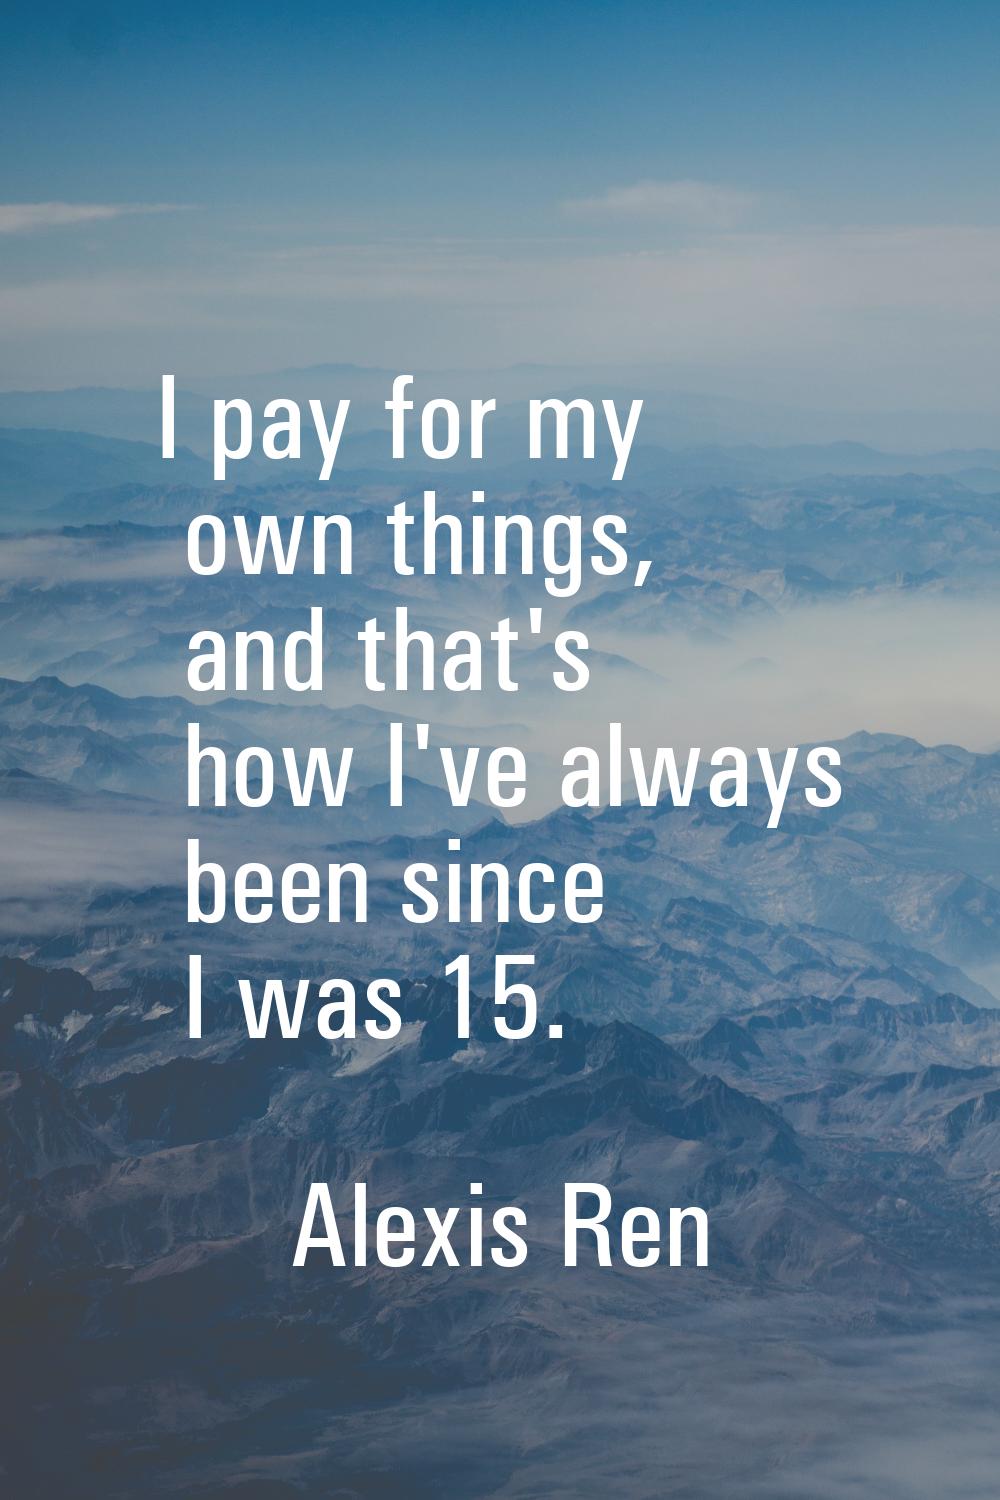 I pay for my own things, and that's how I've always been since I was 15.